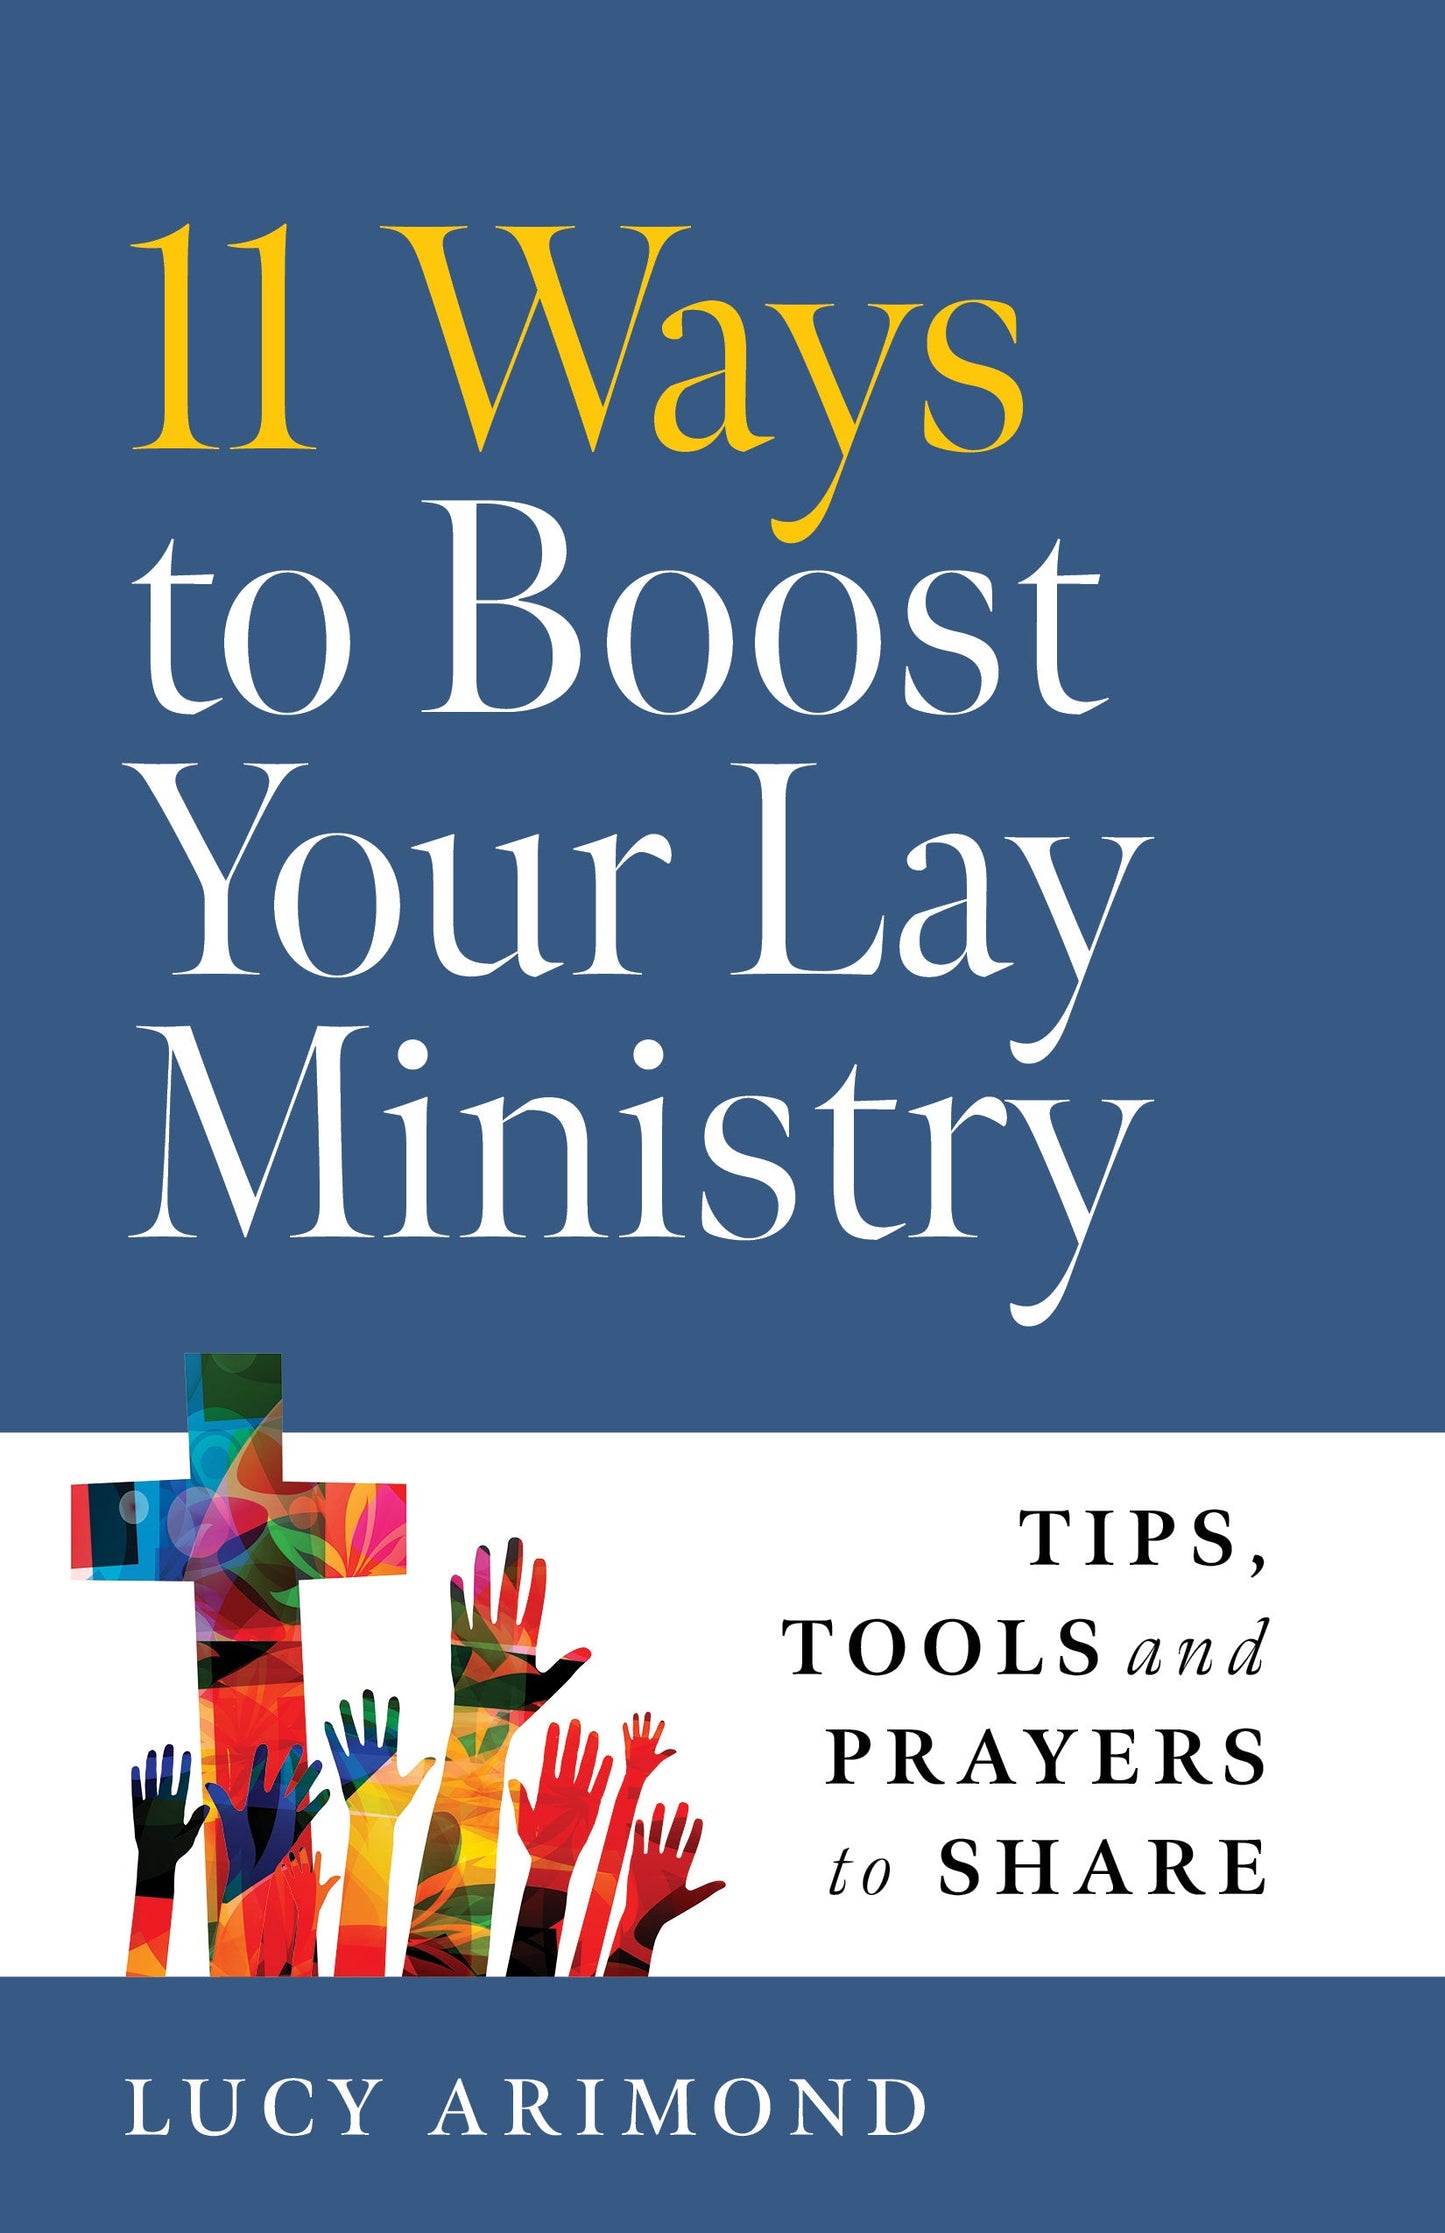 SALE - 11 Ways to Boost Your Lay Ministry